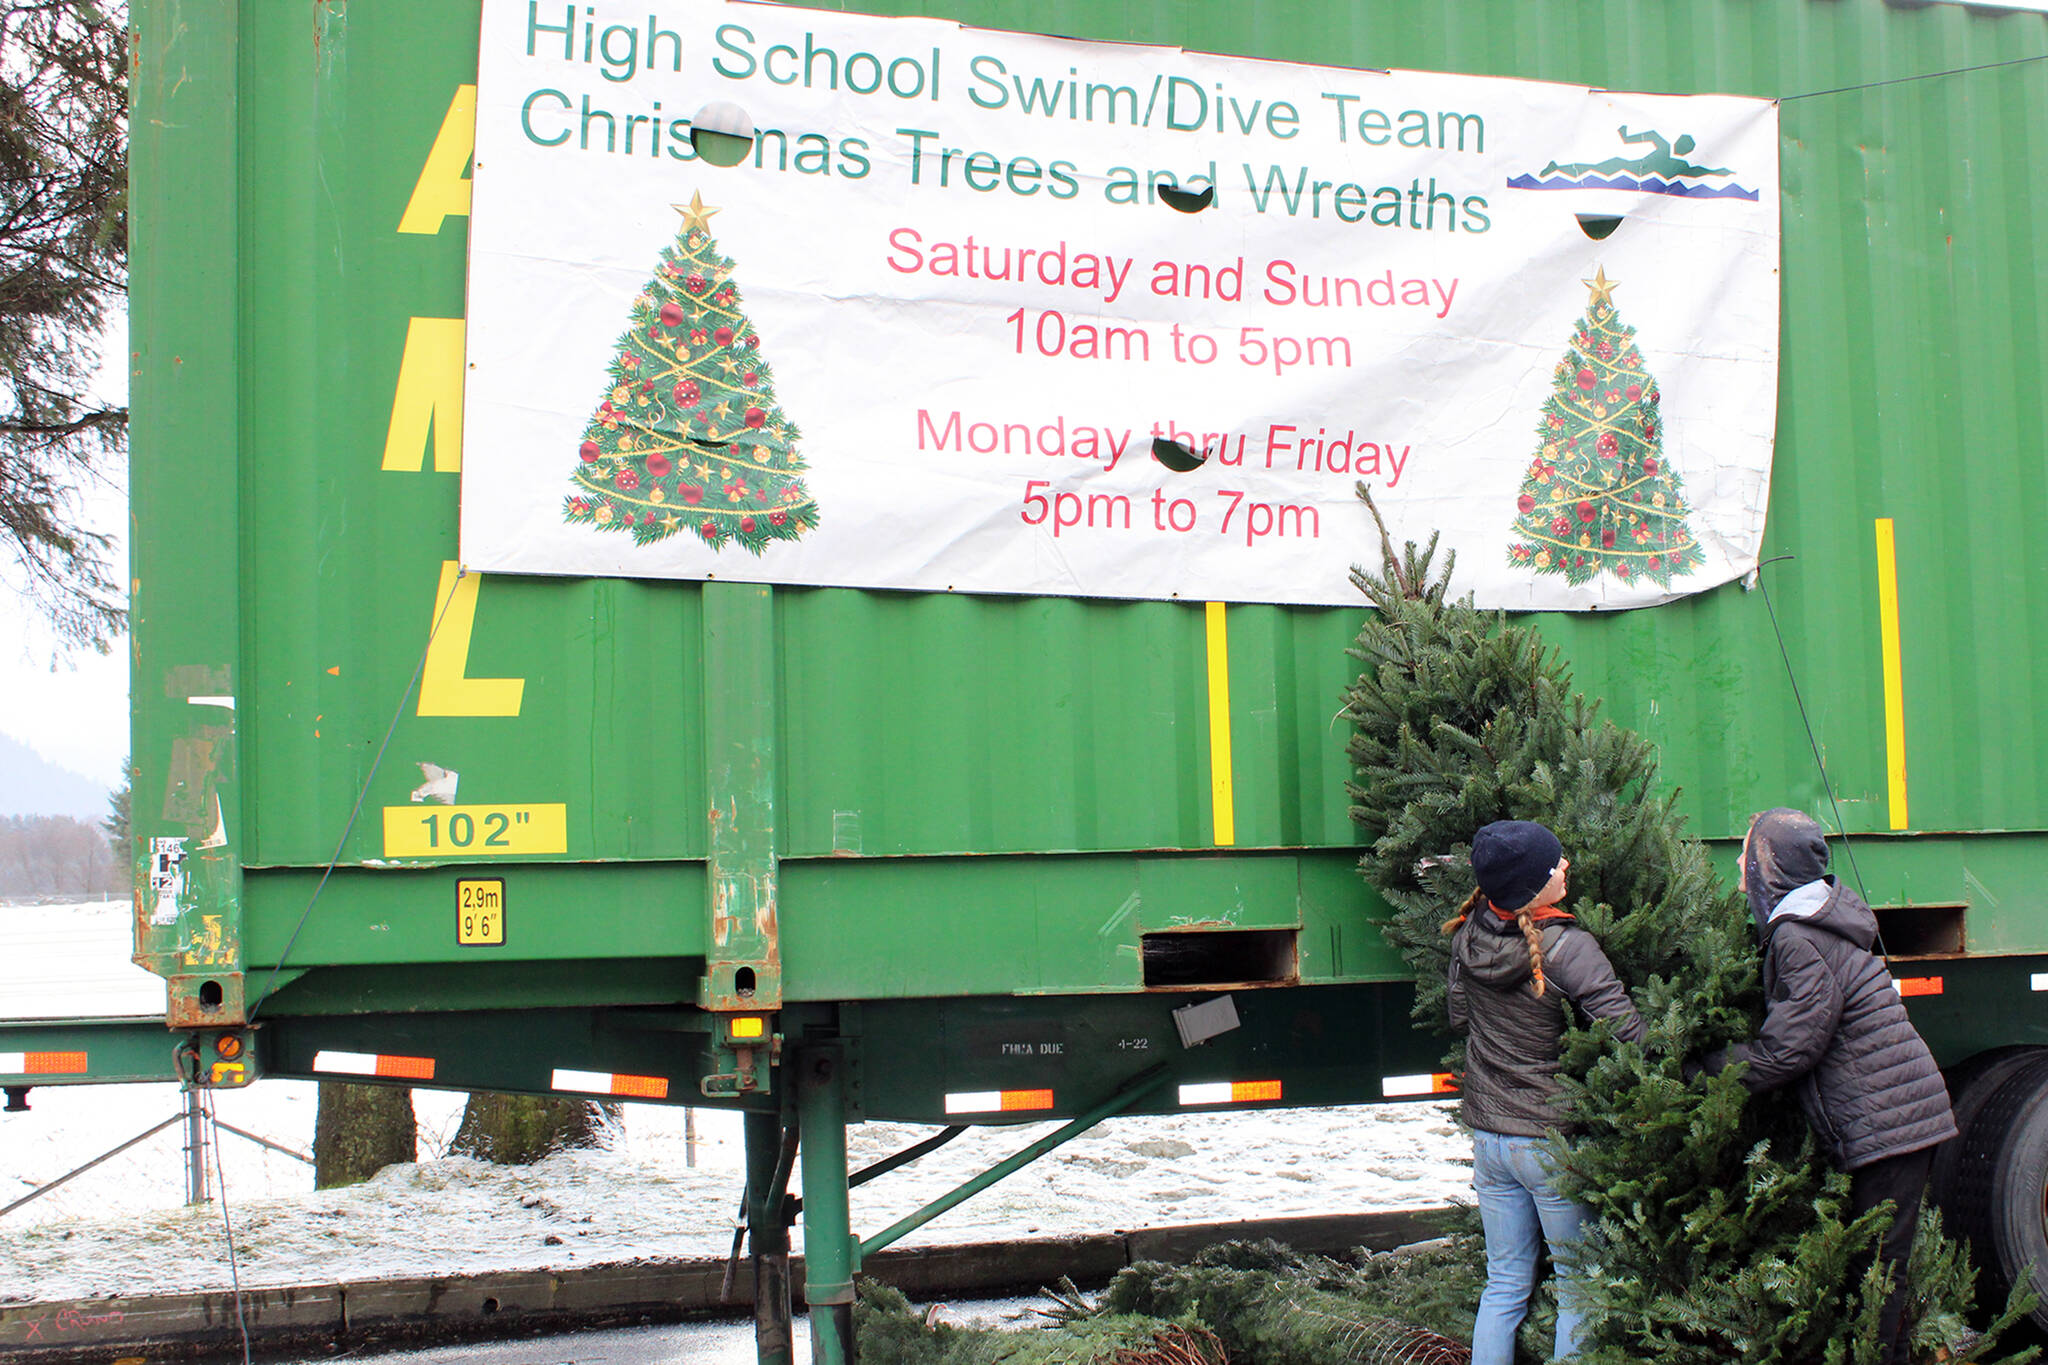 Dana Zigmund / Juneau Empire 
Owen Rumsey and Pacific Ricke, both Juneau-Douglas High School: Yadaa.at Kalé freshmen, move a Christmas tree during the swimming and diving team’s annual tree and wreath sale. The JDHS and Thunder Mountain High School swim and dive teams are selling Christmas trees and wreaths. Trees start at $50 and wreaths are $40, delivery is offered for $25. The sale will be open every evening but with different hours on weekends. Weekdays, the sale will be open from 5-7 p.m. and 10 a.m.-5 p.m. on weekends. Online ordering is available at jdswimdive.org.